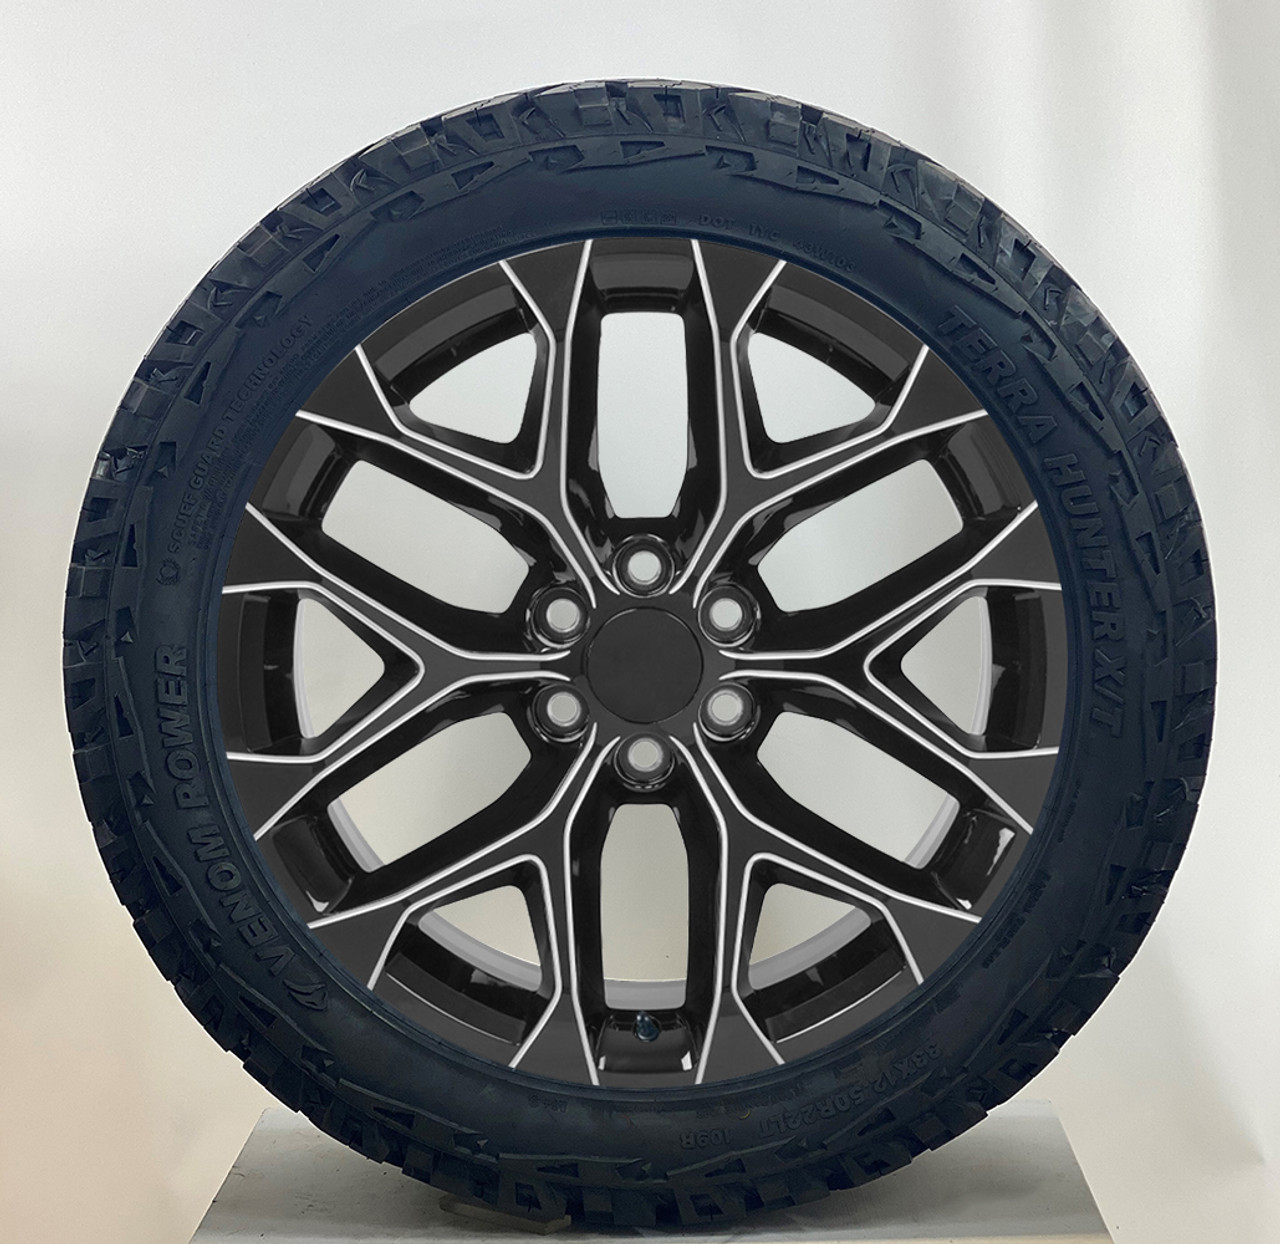 Black Milled 22" Snowflake Wheels with 33x12.50R22 Tires for Chevy and GMC Trucks and SUVs- New Set of 4